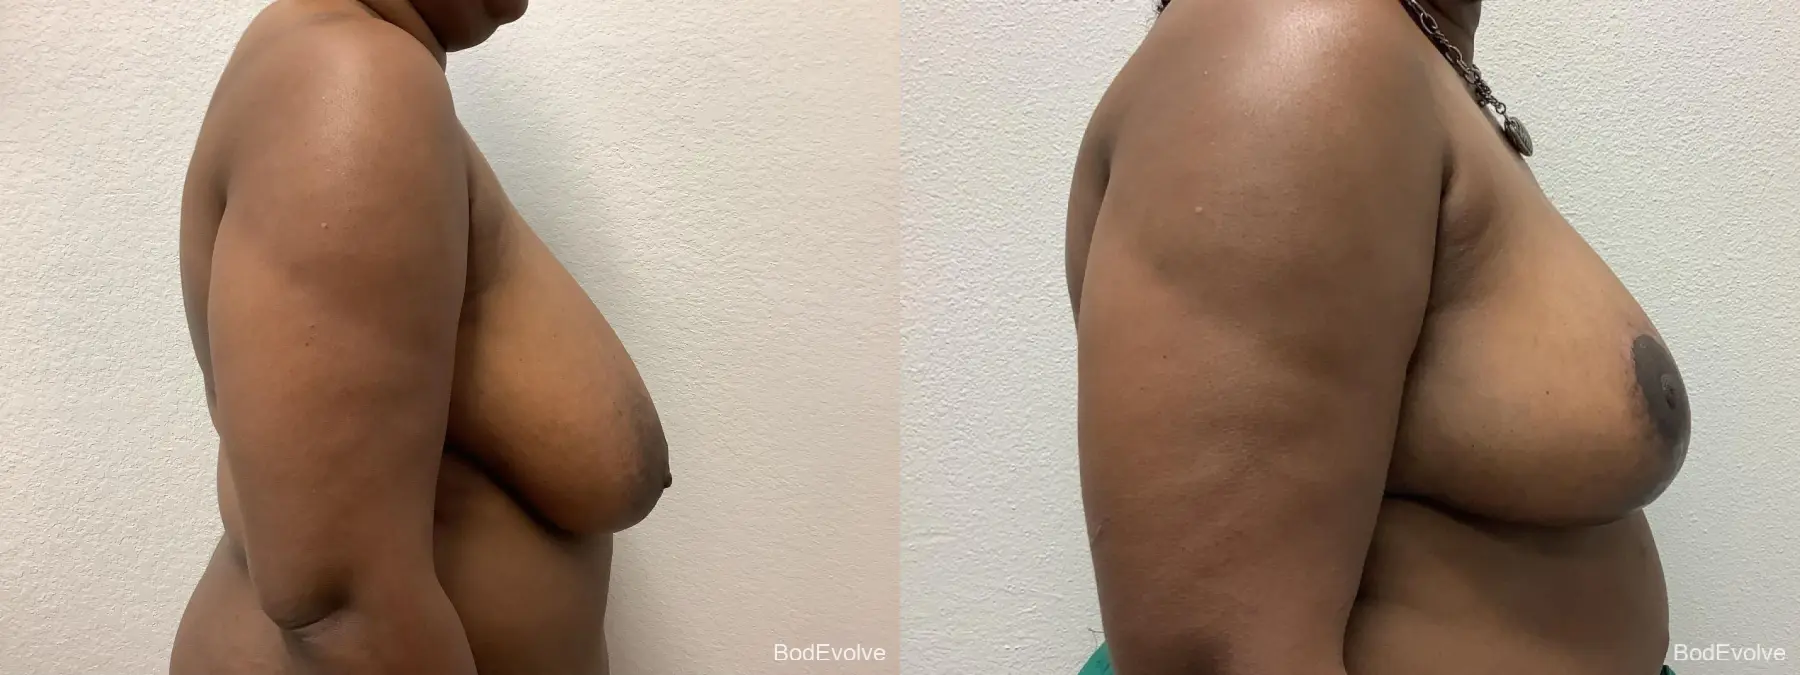 Breast Reduction: Patient 5 - Before and After 5